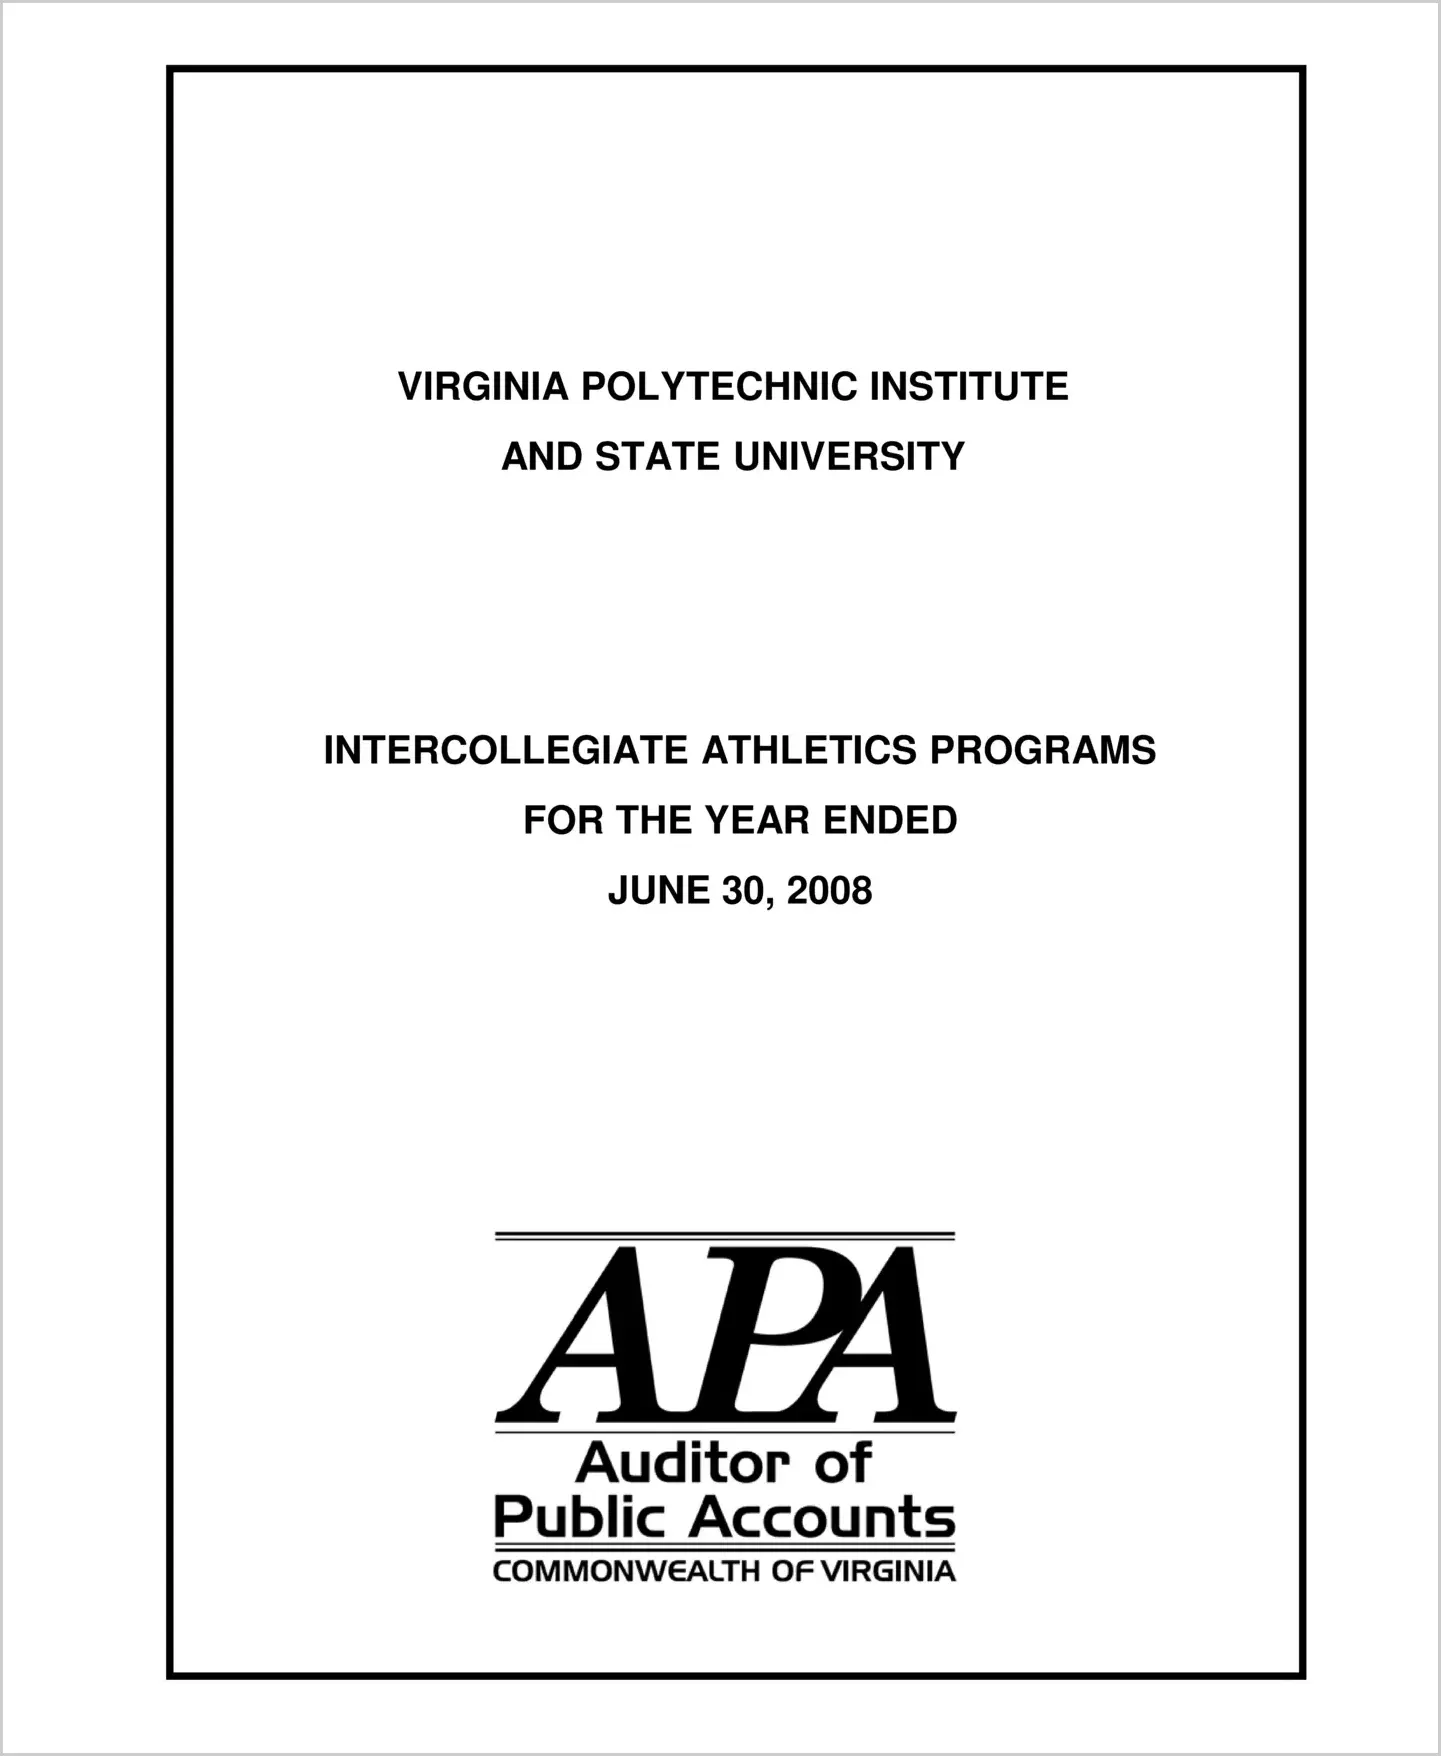 Virginia Polytechnic Institute and State University Intercollegiate Athletic Programs for the year ended June 30, 2008